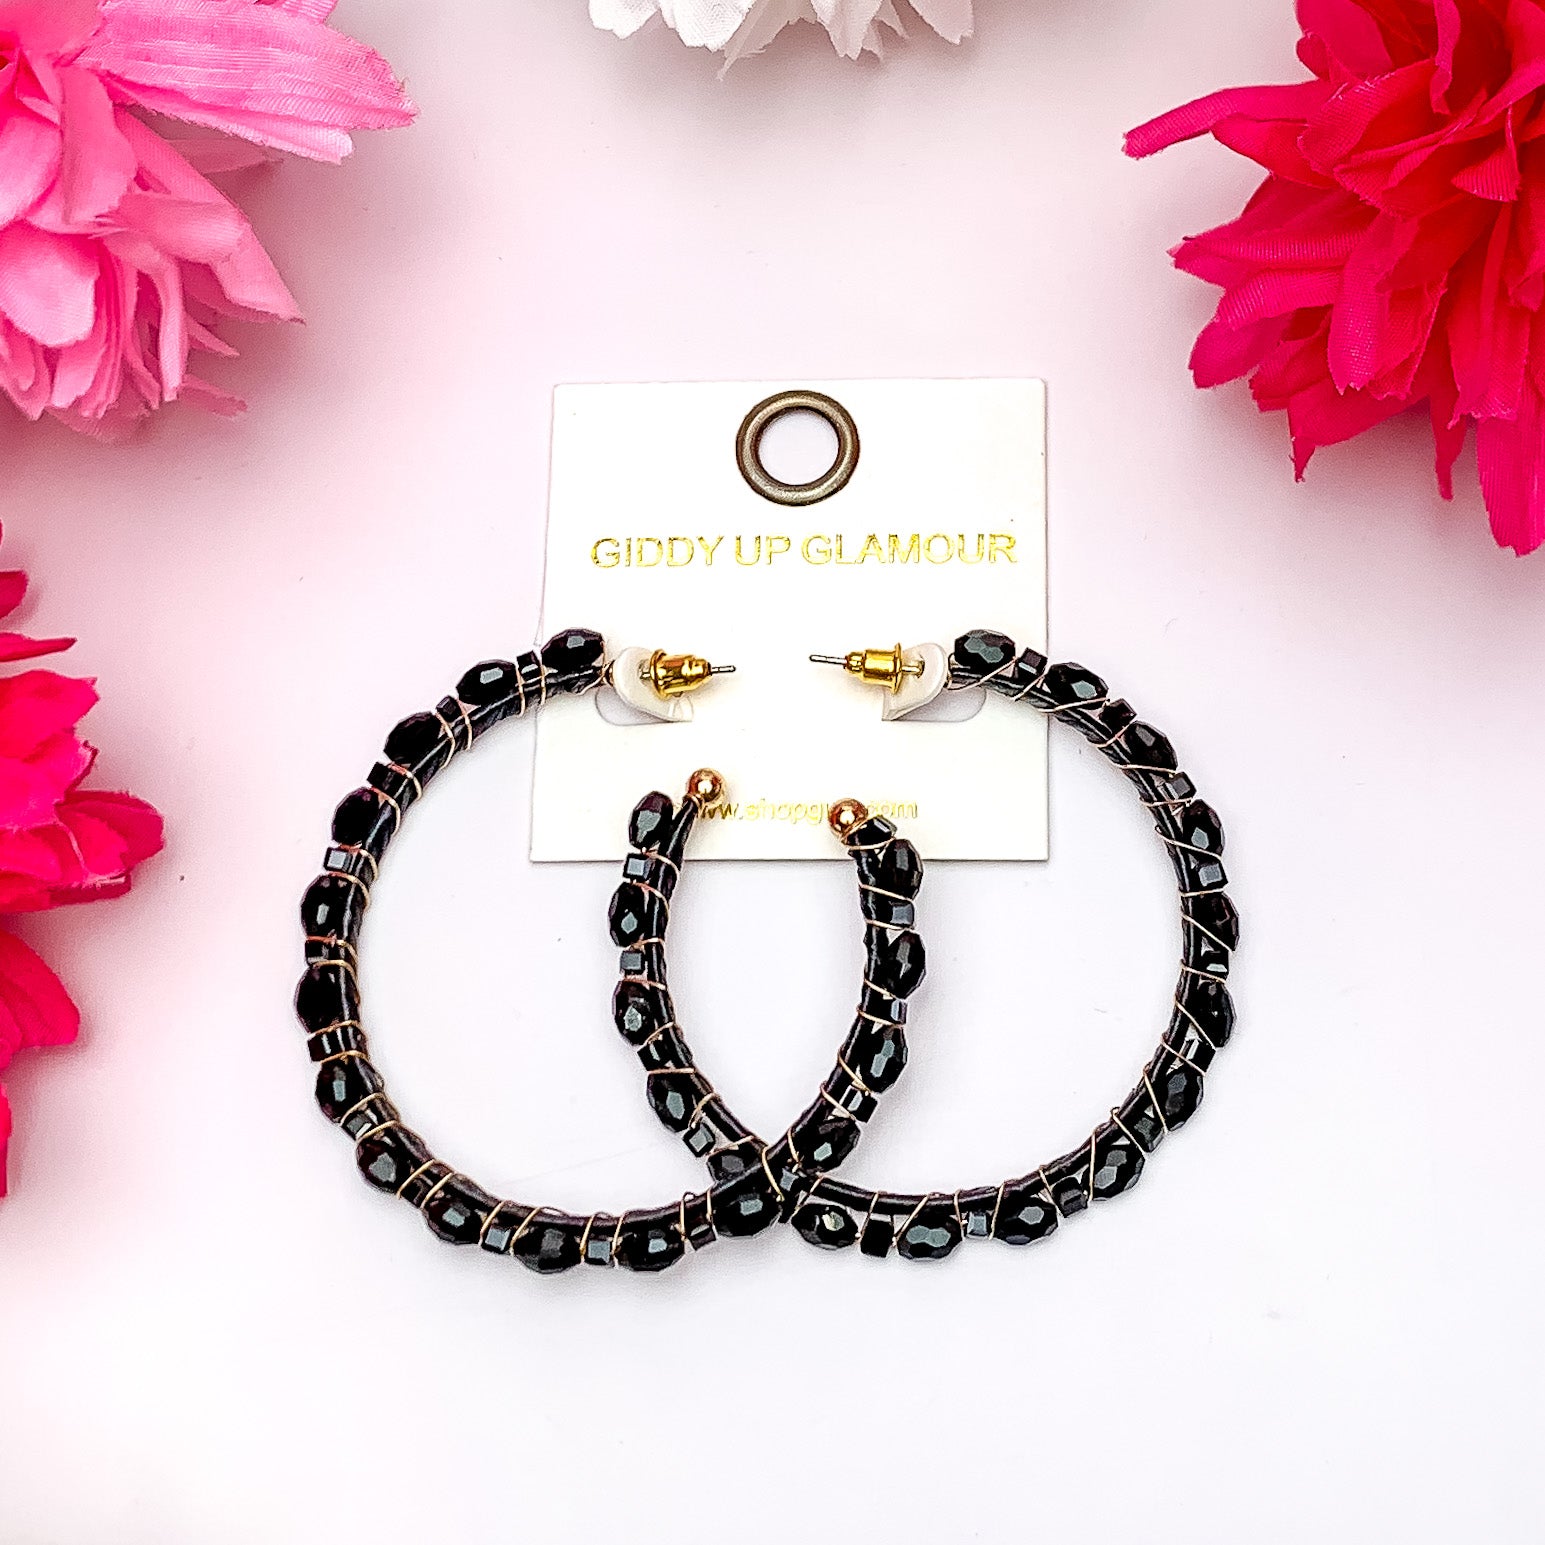 Large Hoop Earrings Outlined with Crystals in Black. Pictured on a white background surrounded by pink flowers.